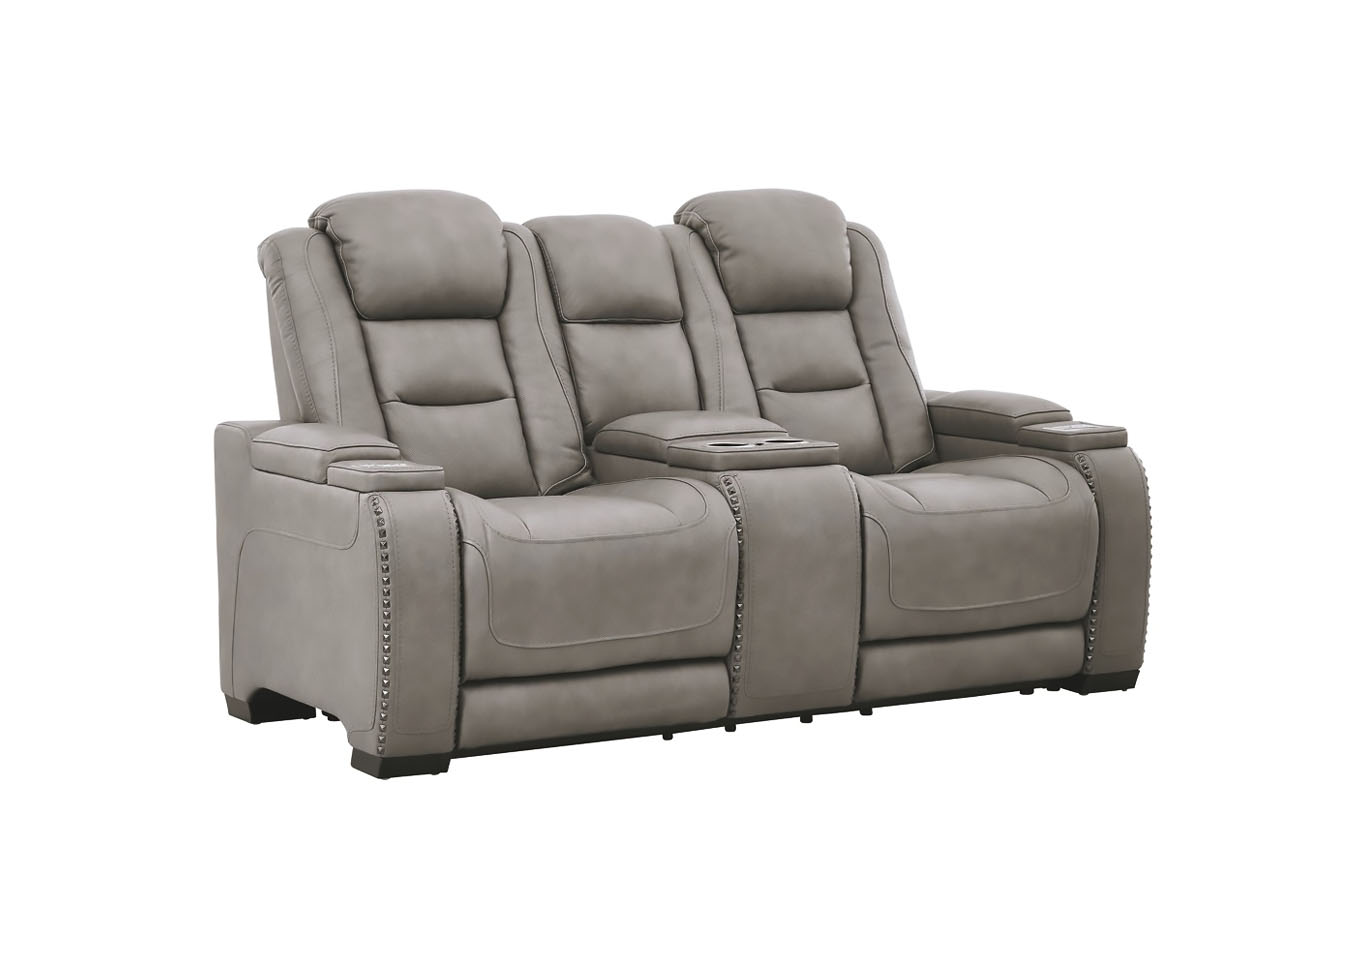 MAN-DEN GRAY 3P POWER LOVESEAT WITH CONSOLE,ASHLEY FURNITURE INC.